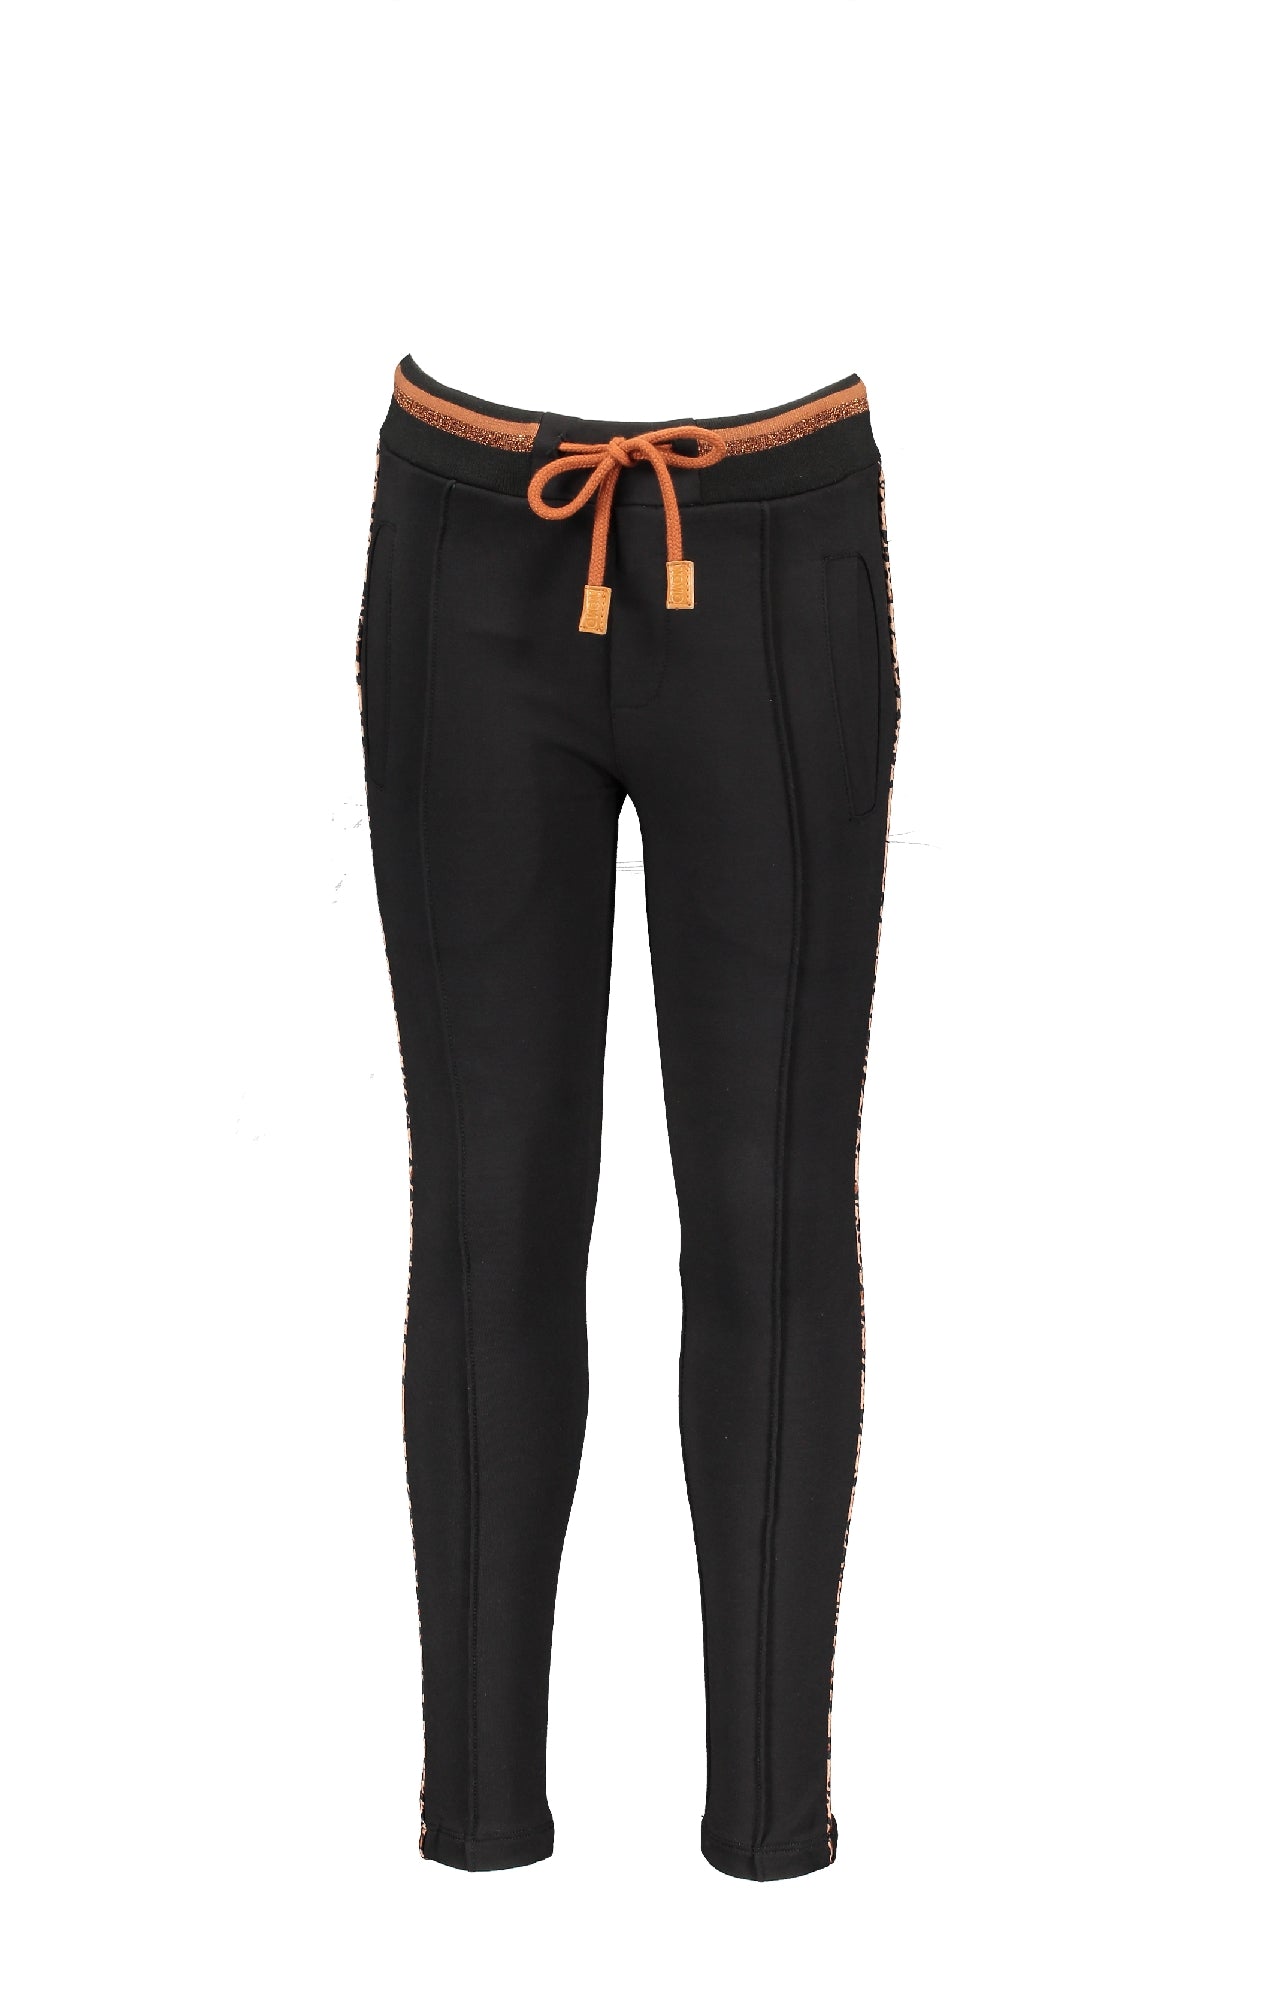 NoNo SeclerB sweat pants with leopard piping at side seams